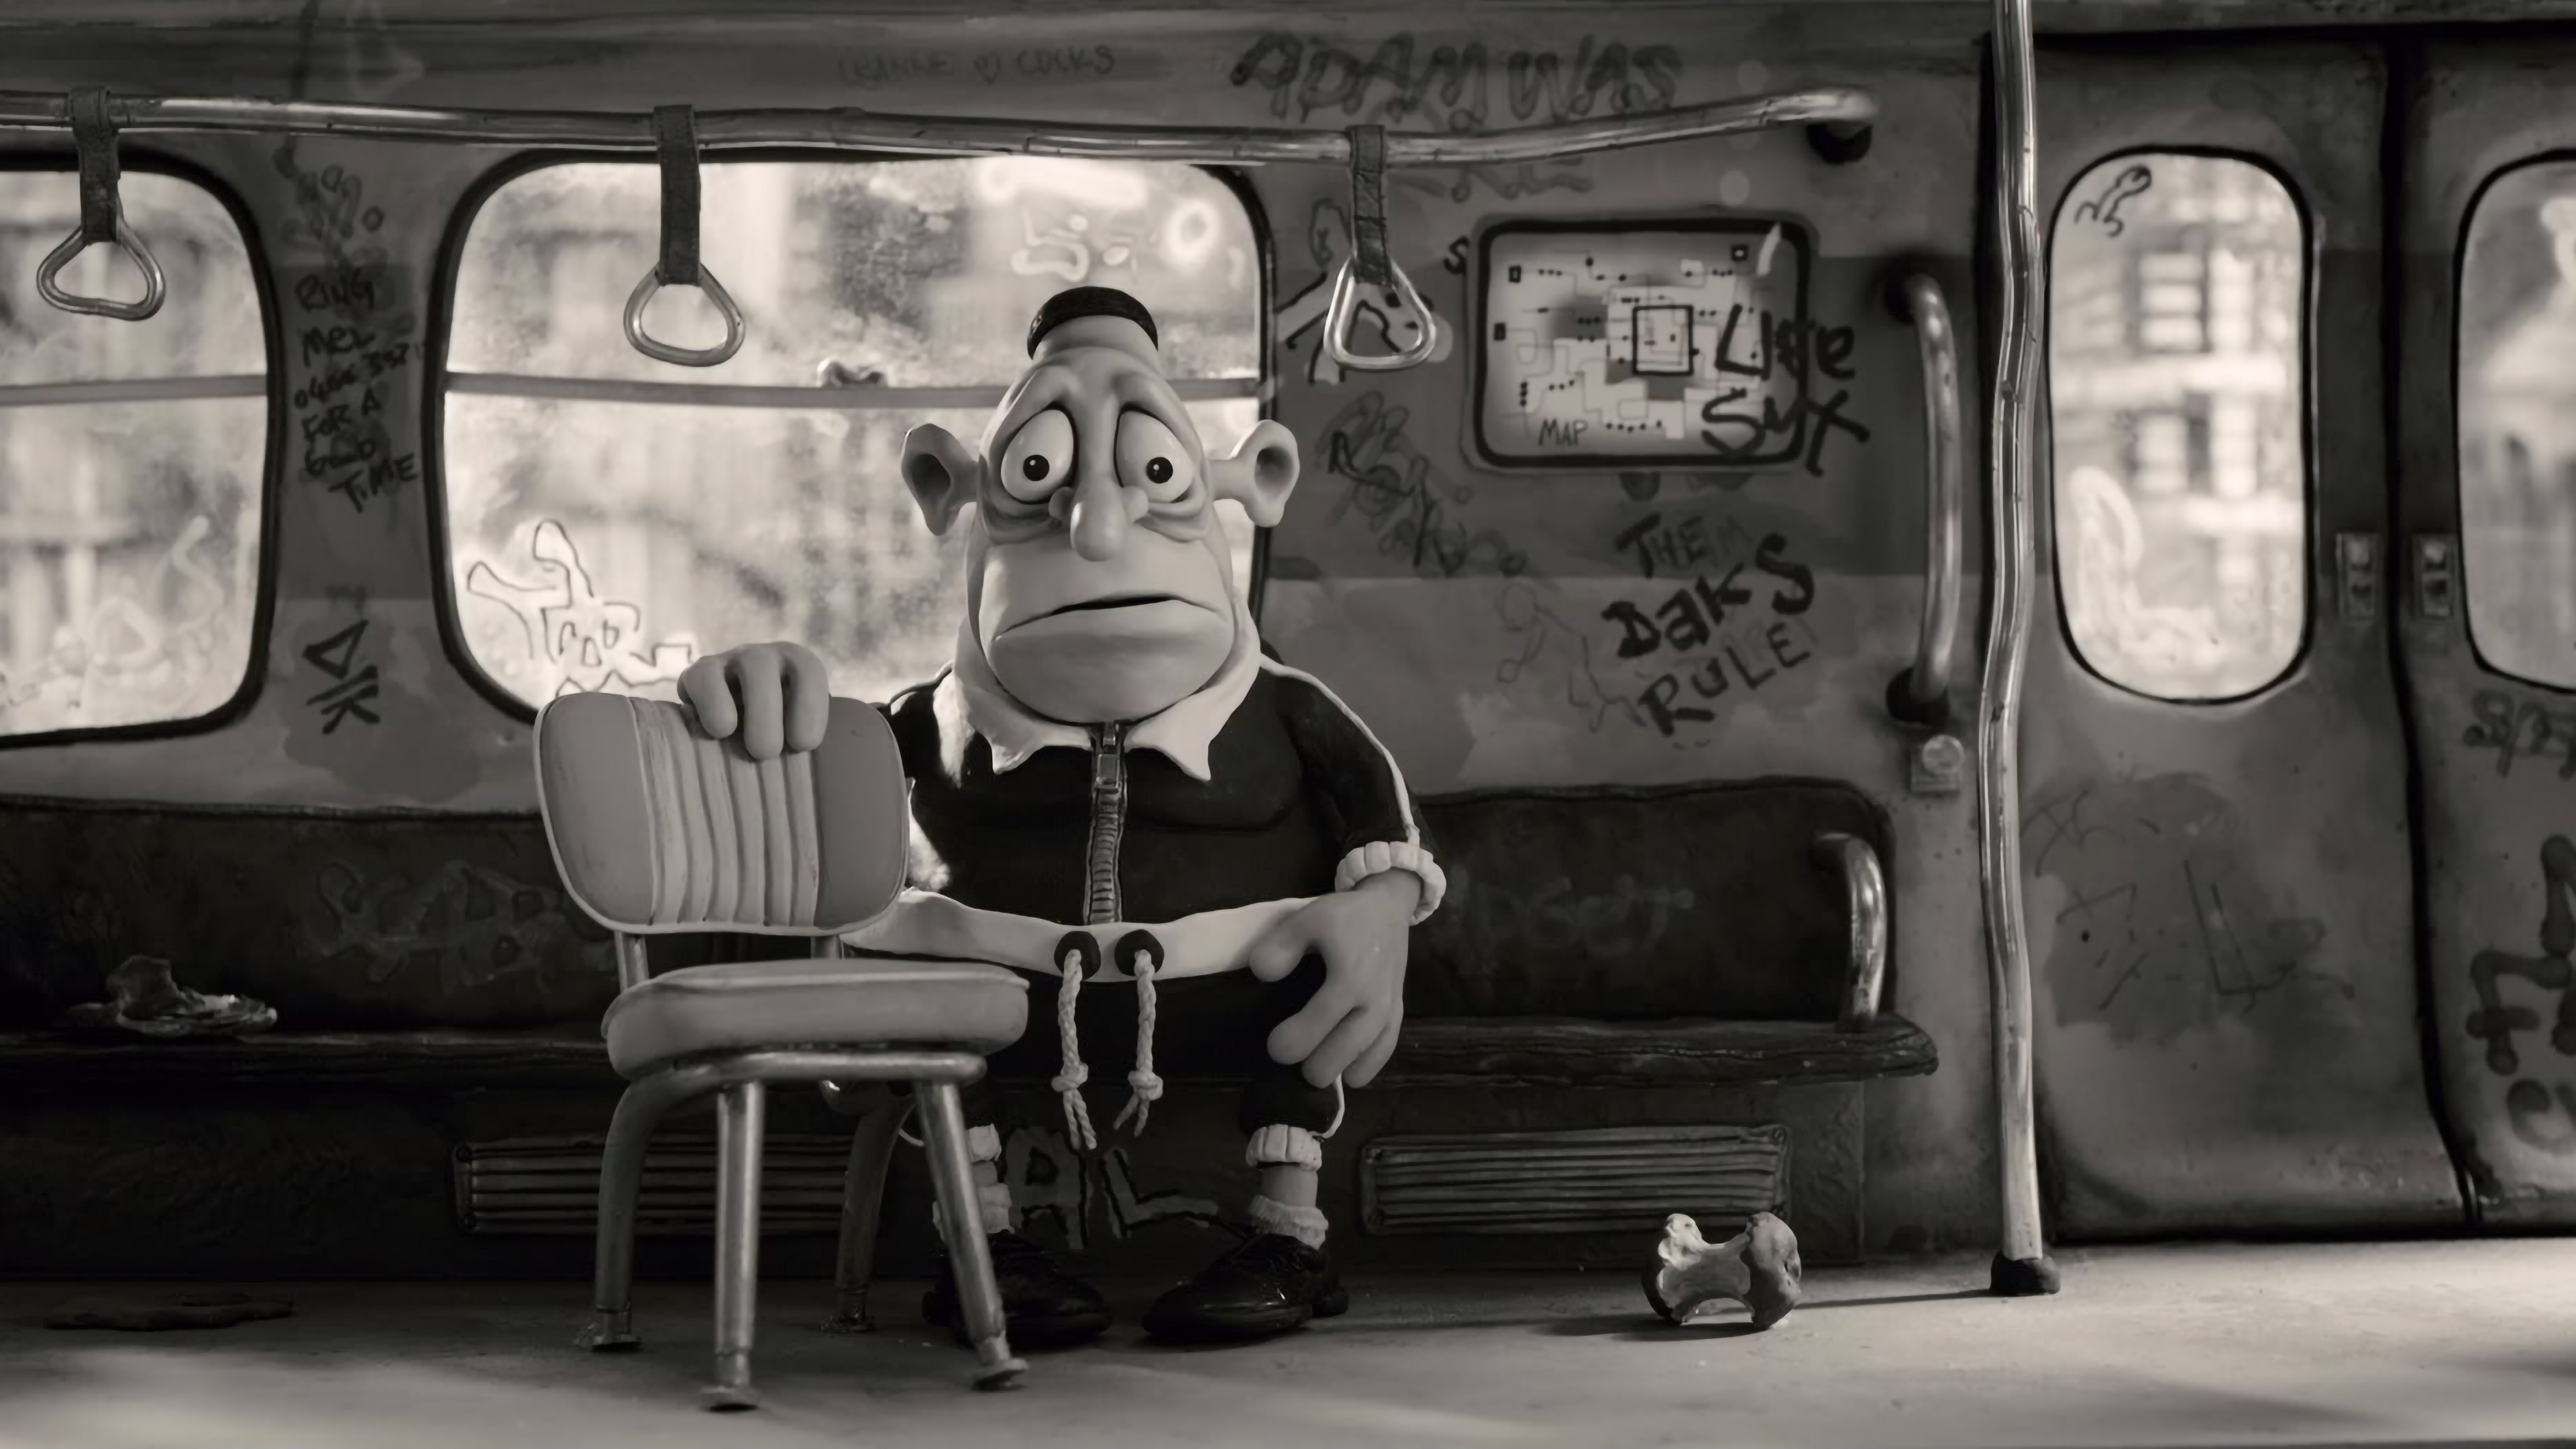 Mary And Max Stop Animation Puppets Low Saturation 3840x2160